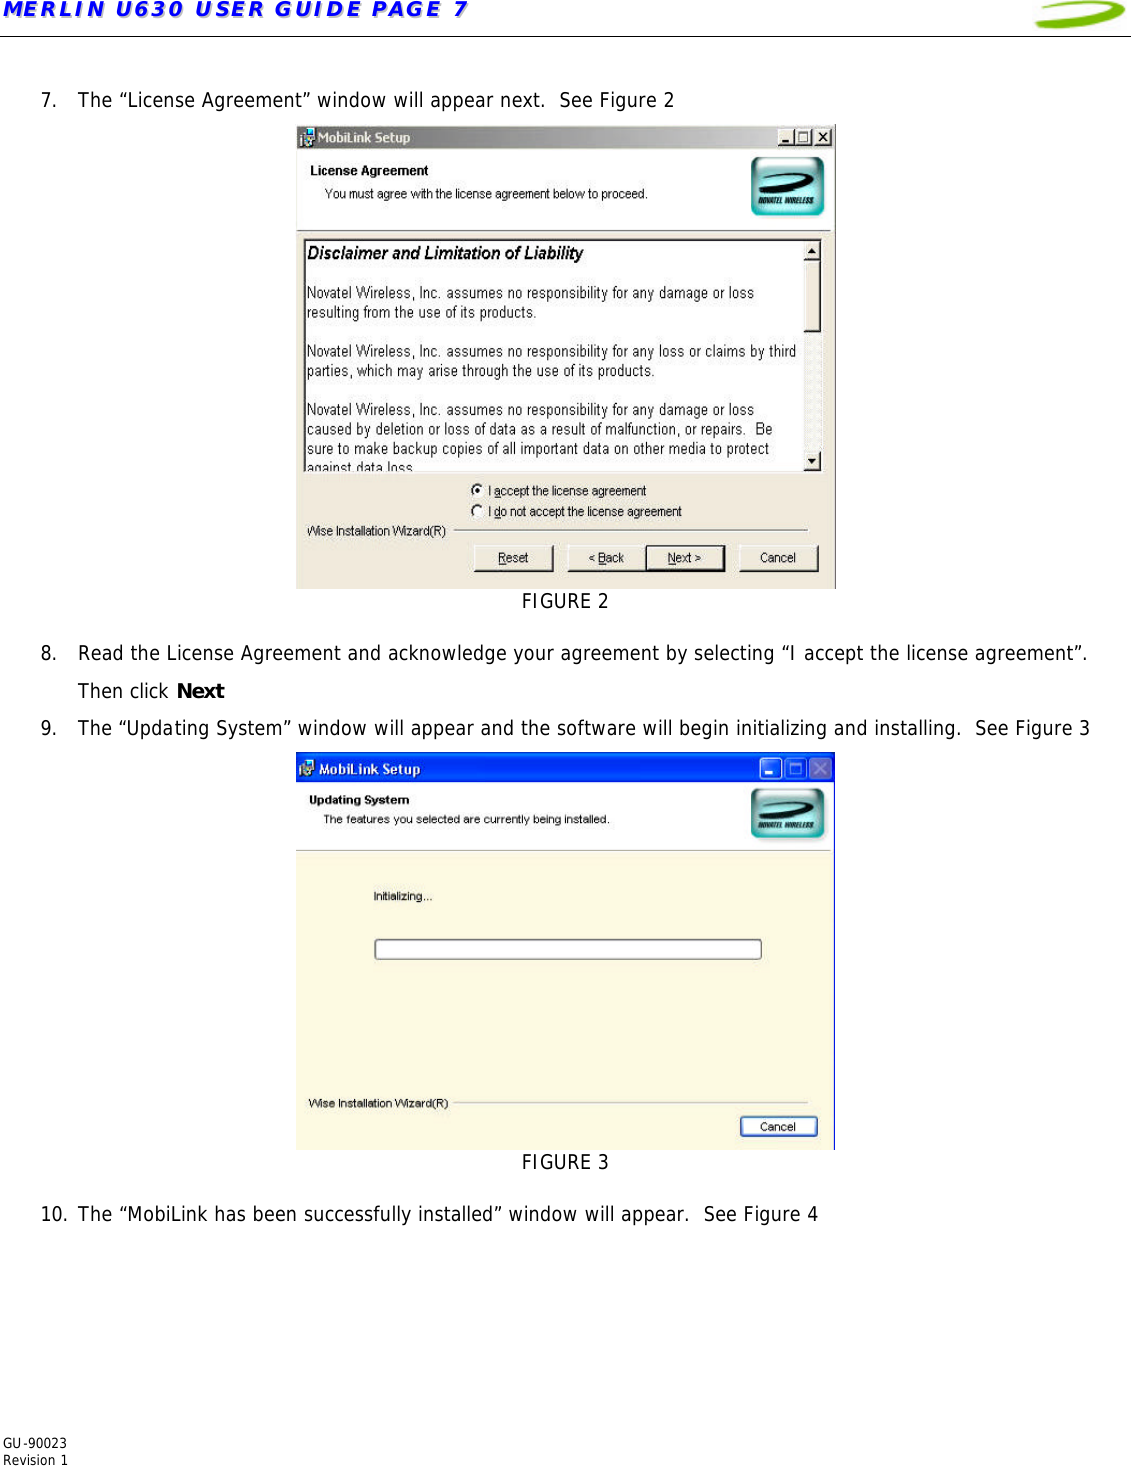 MMEERRLLIINN  UU663300  UUSSEERR  GGUUIIDDEE  PPAAGGEE  77   GU-90023  Revision 1   7. The “License Agreement” window will appear next.  See Figure 2  FIGURE 2  8. Read the License Agreement and acknowledge your agreement by selecting “I accept the license agreement”.  Then click Next 9. The “Updating System” window will appear and the software will begin initializing and installing.  See Figure 3  FIGURE 3  10. The “MobiLink has been successfully installed” window will appear.  See Figure 4   